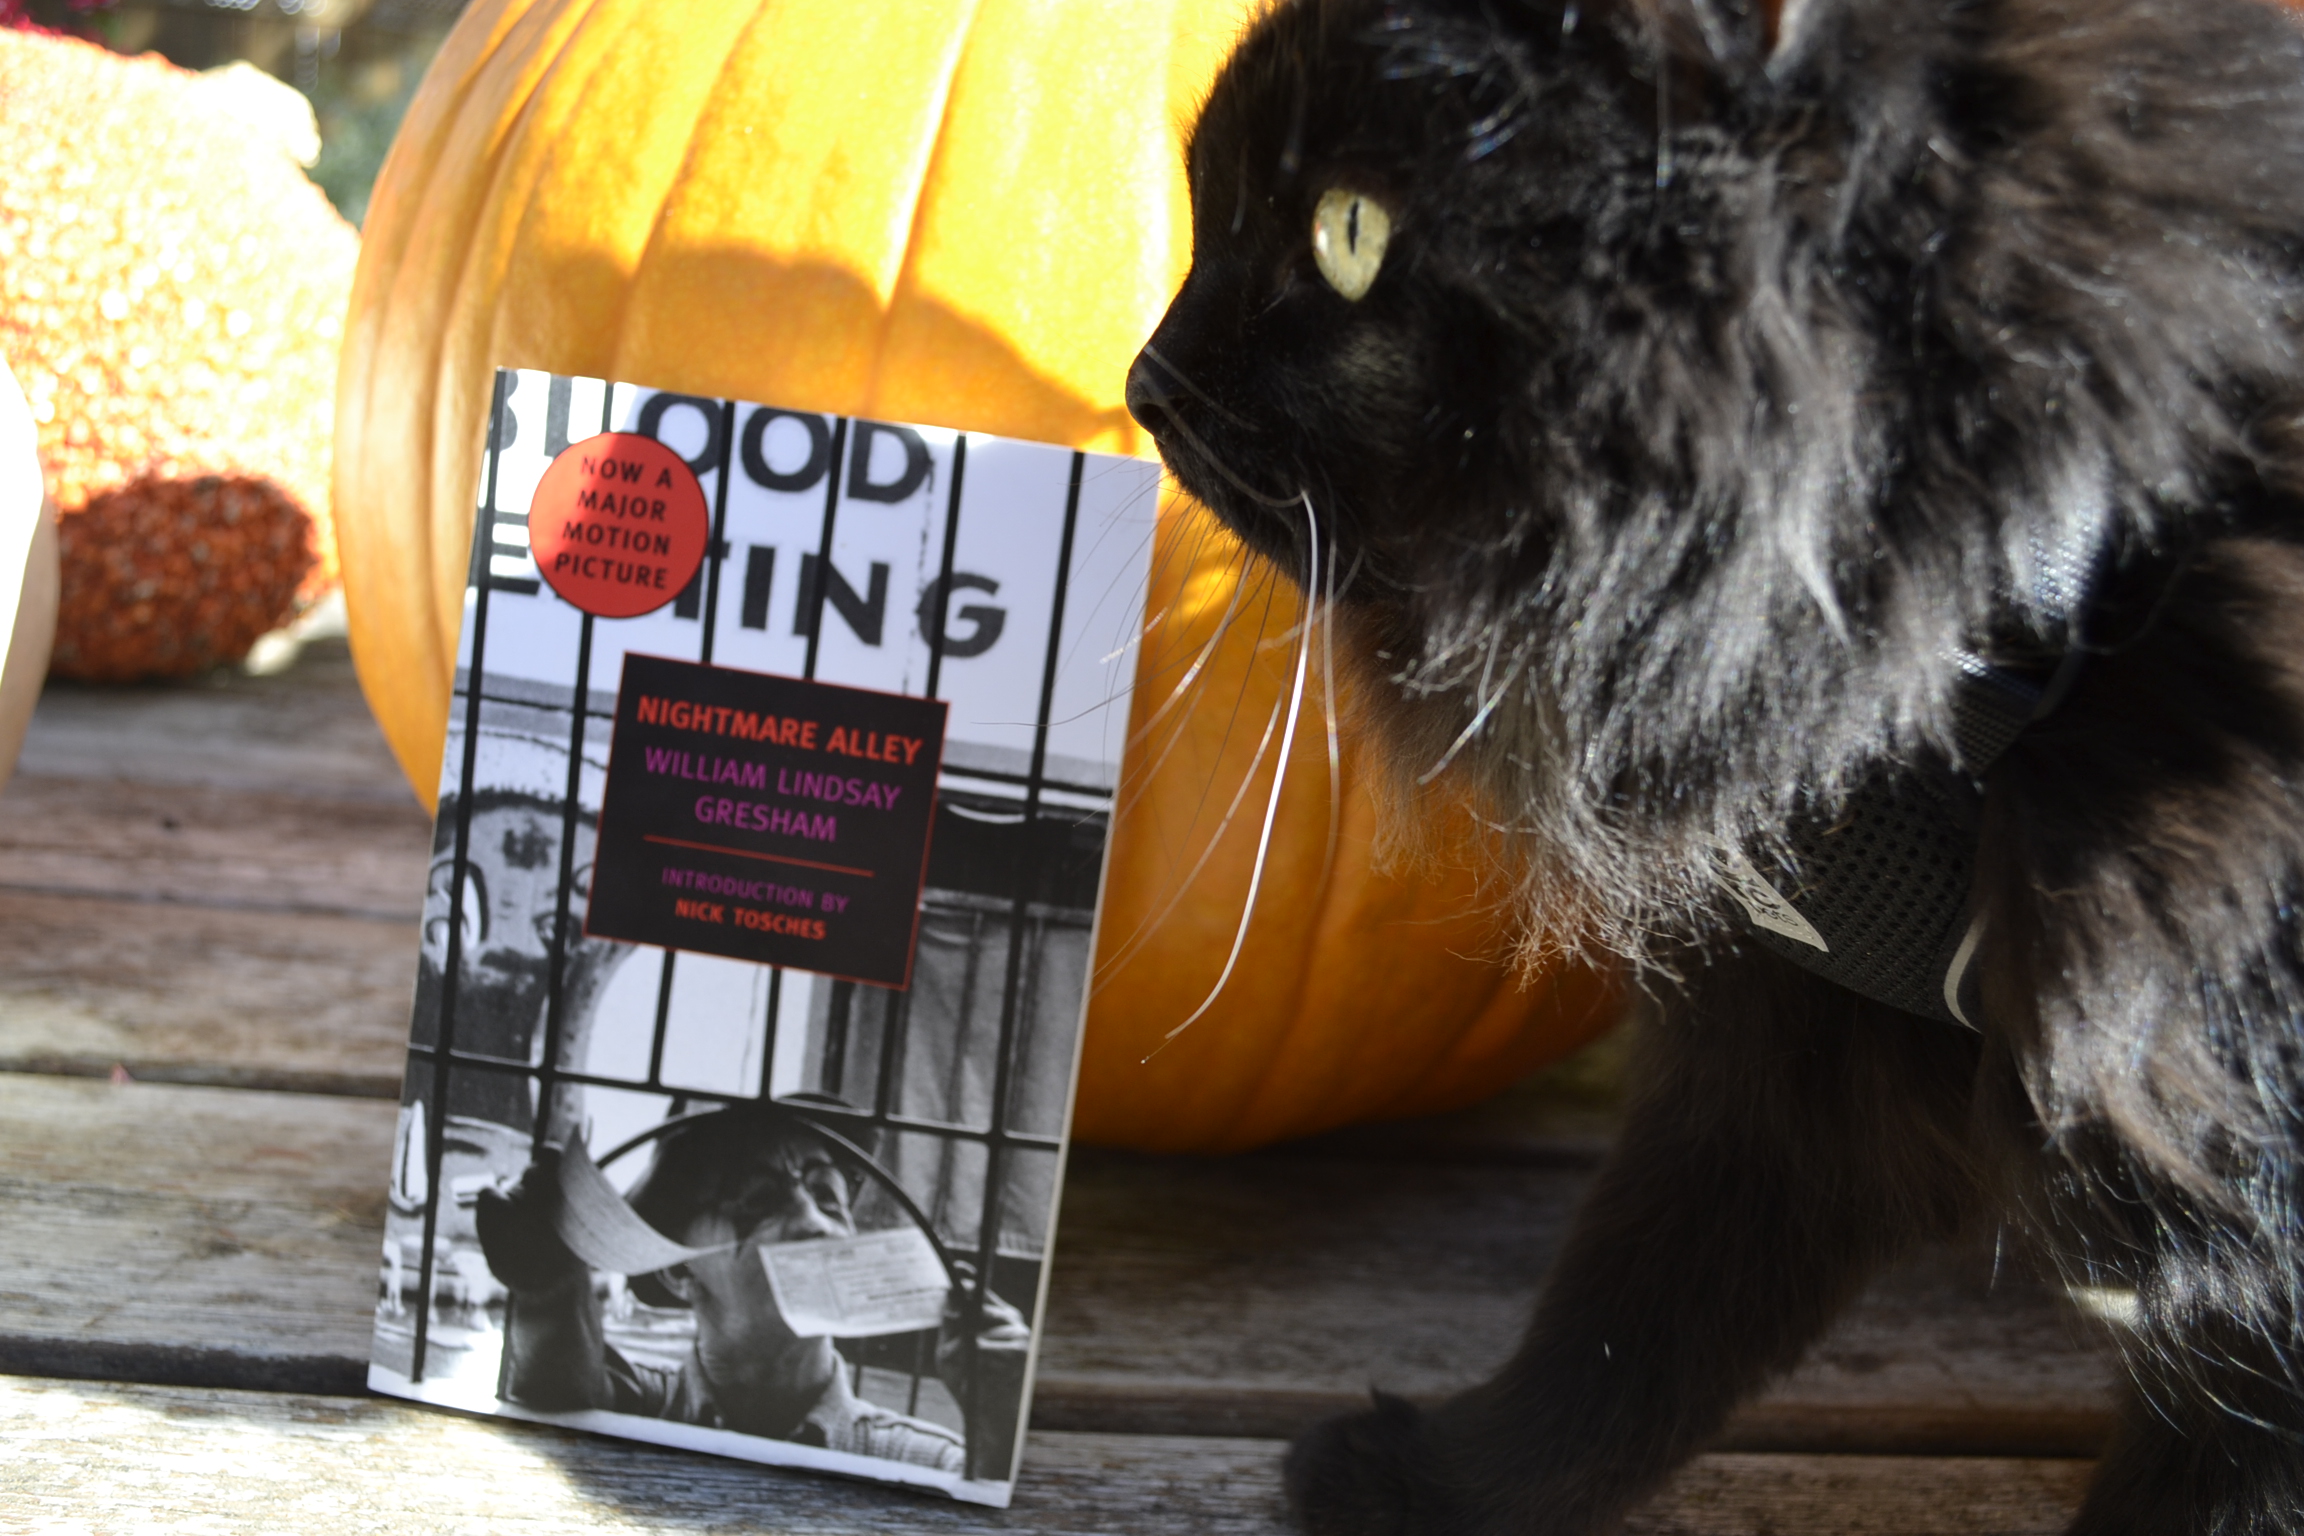 A fluffy black cat stands beside some pumpkins and a copy of Nightmare Alley.